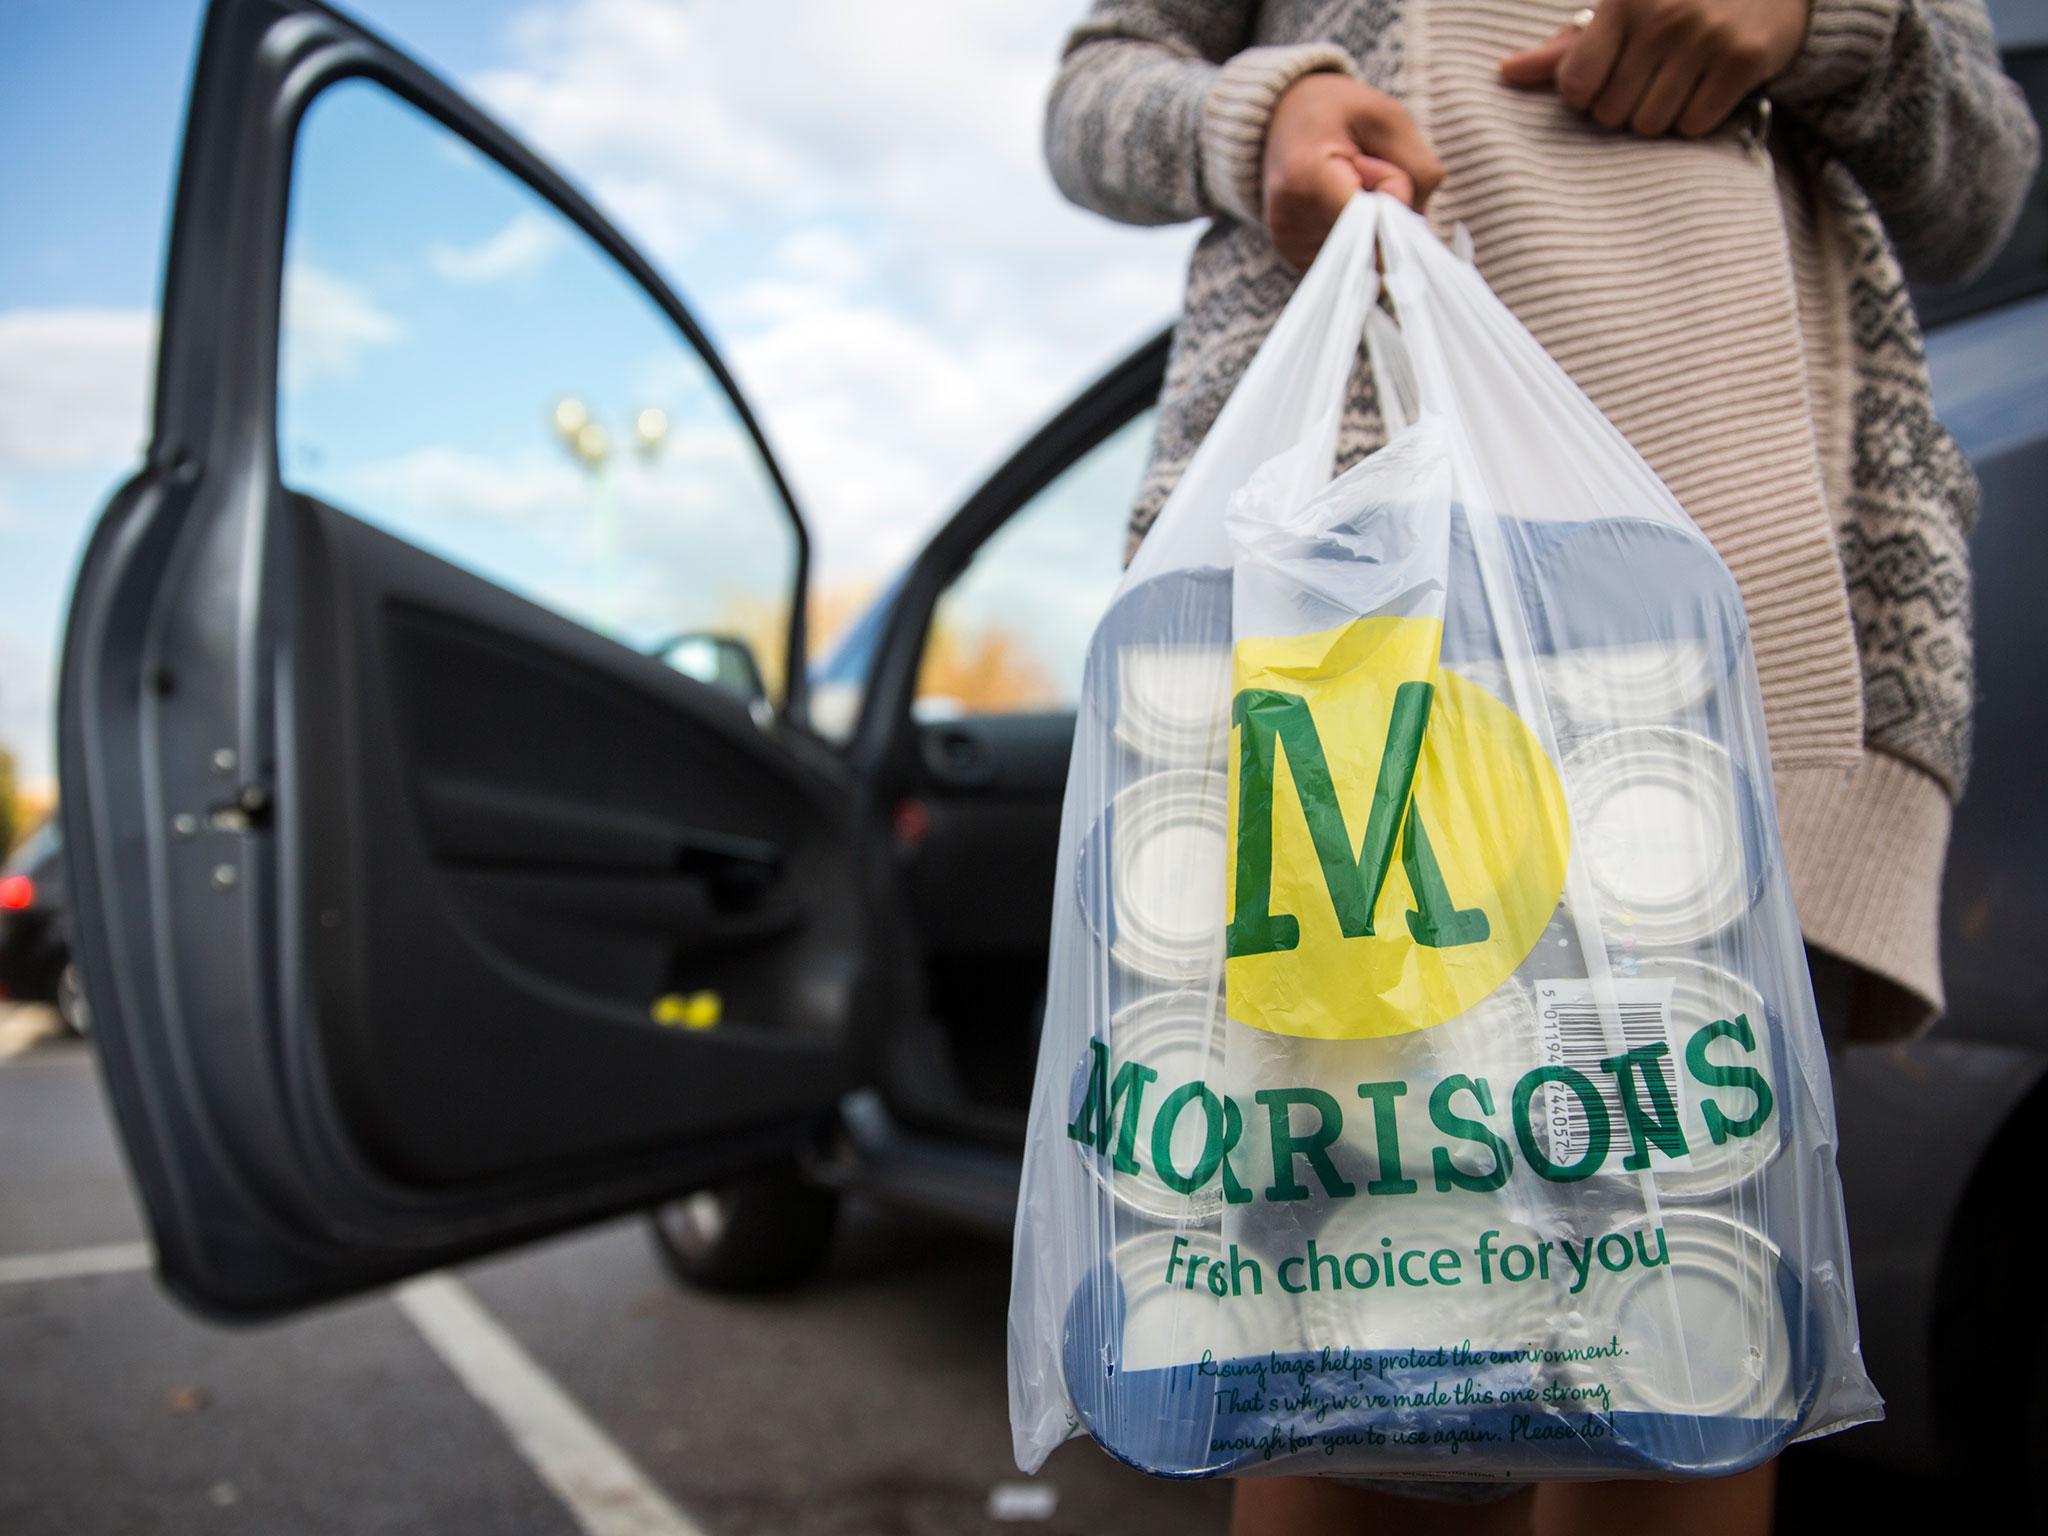 Morrisons is slashing the price of over 1,000 products to allay consumers fears of price inflation after the EU referendum